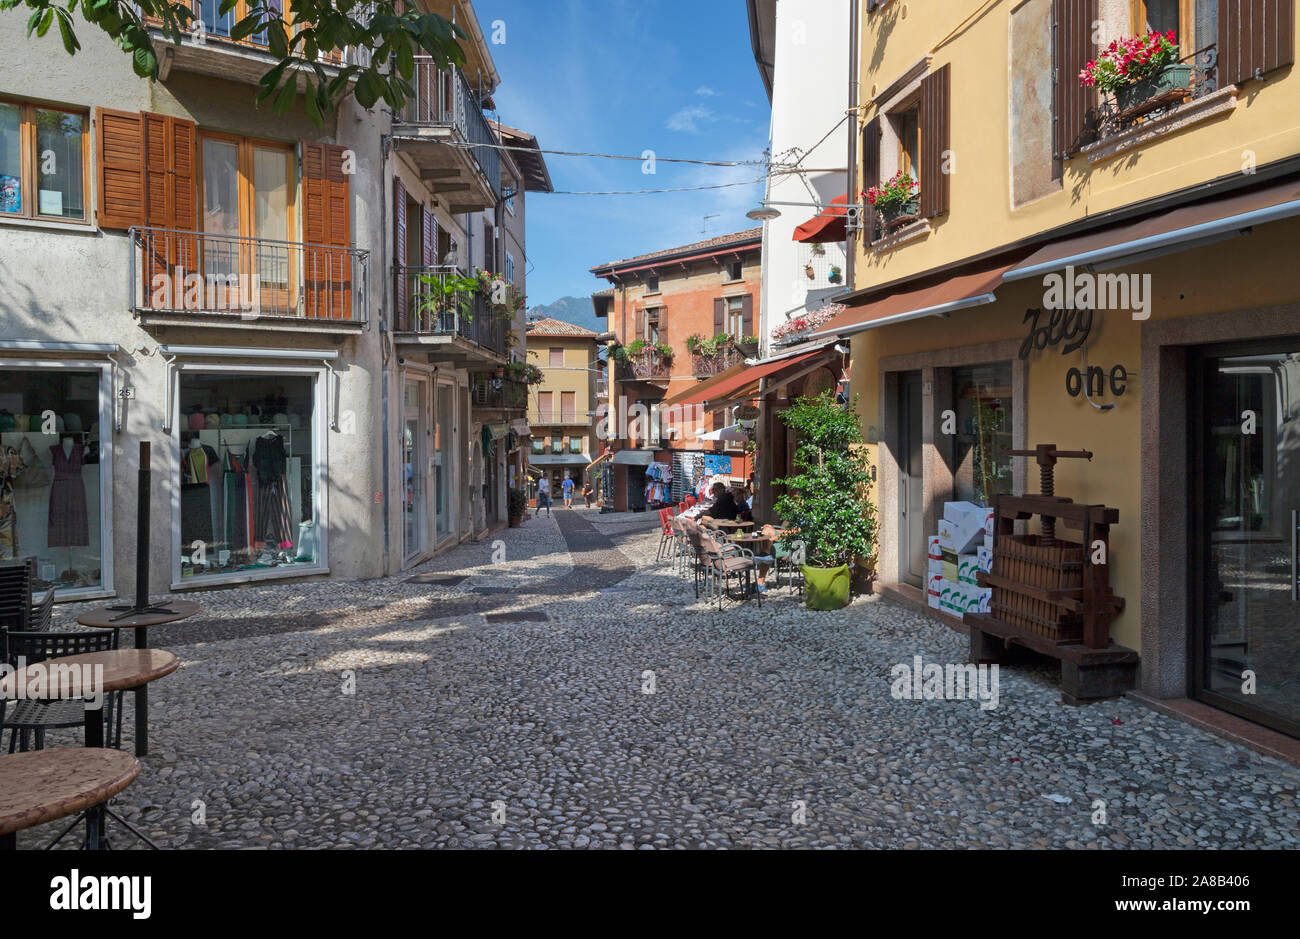 MALCESINE, ITALY - JUNE 13, 2019: The little square of the old town on the waterfront of Lago di Garda lake. Stock Photo